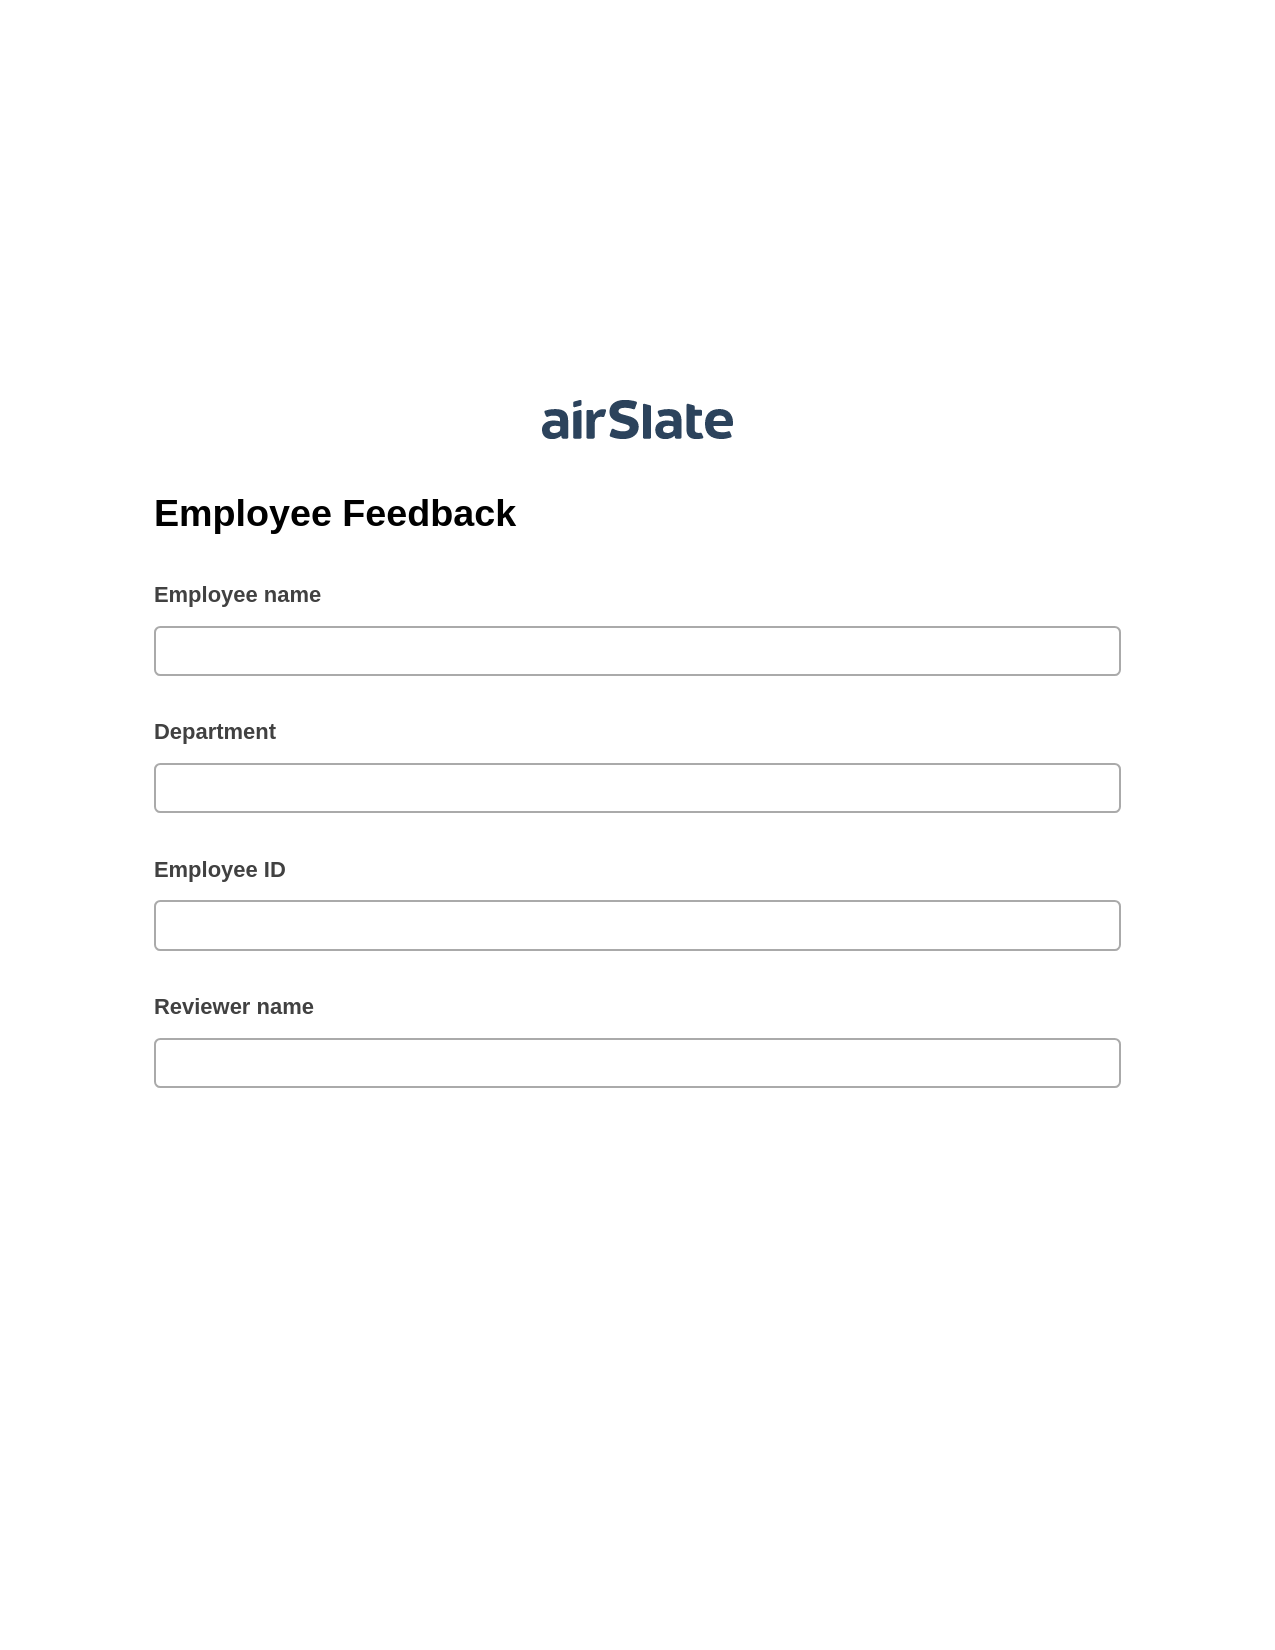 Employee Feedback Pre-fill from Google Sheets Bot, Unassign Role Bot, Archive to SharePoint Folder Bot